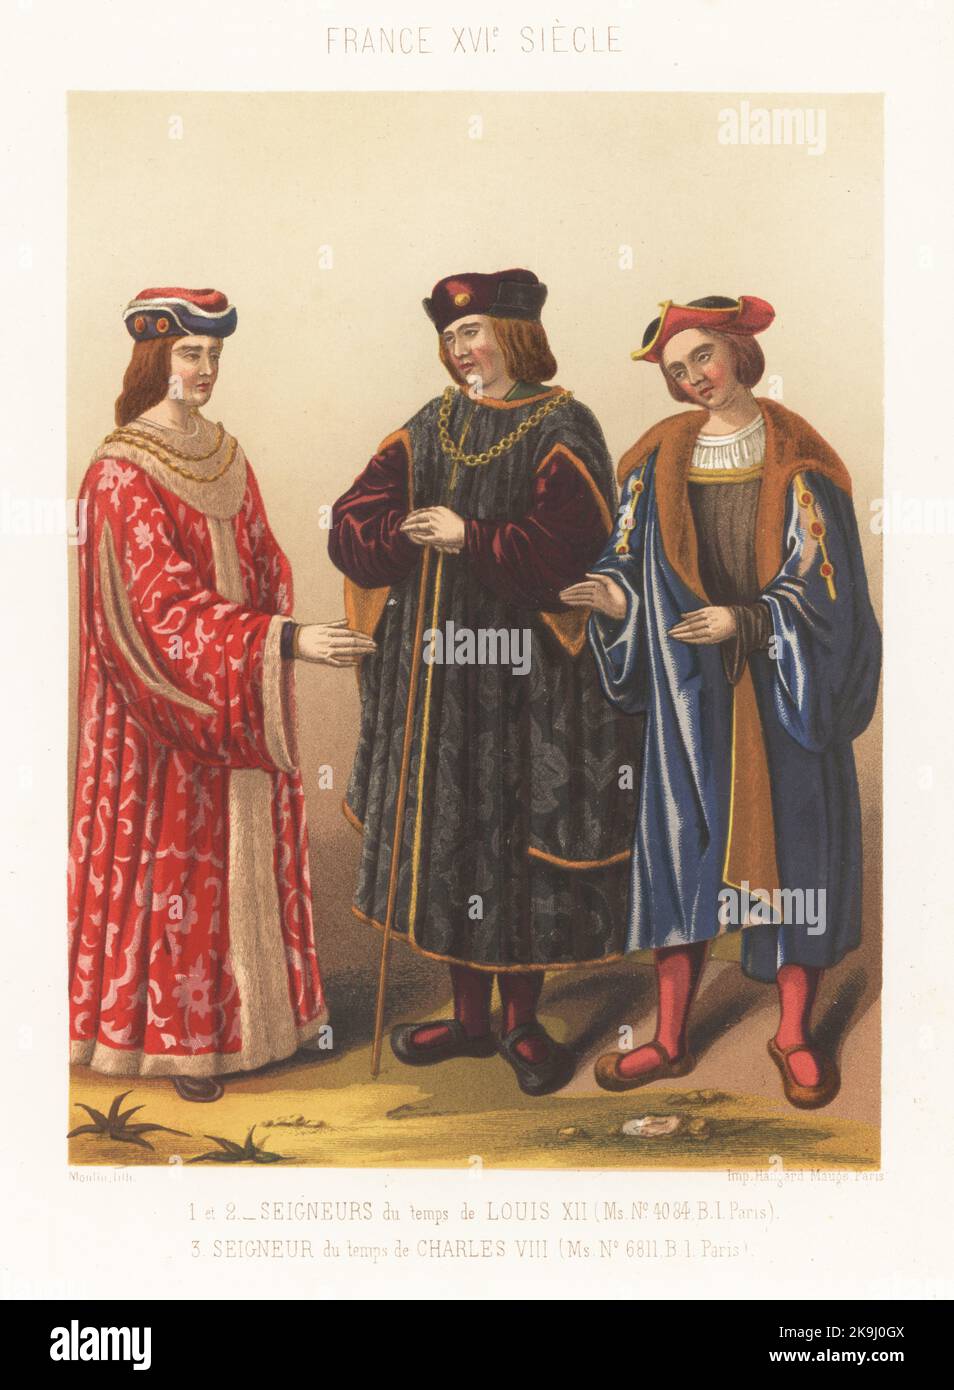 Costume of aristocrats in the era of Louis XII 1,2, and Charles VIII 3. They wear long fur-lined coats and flat caps. Seigneurs du temps de Louis XII, et du temps de Charles VIII. Taken from MS 4984 and MS 6811, Bibliotheque Imperiale de Paris. Chromolithograph by Moulin from Charles Louandre’s Les Arts Somptuaires, The Sumptuary Arts, Hangard-Mauge, Paris, 1858. Stock Photo